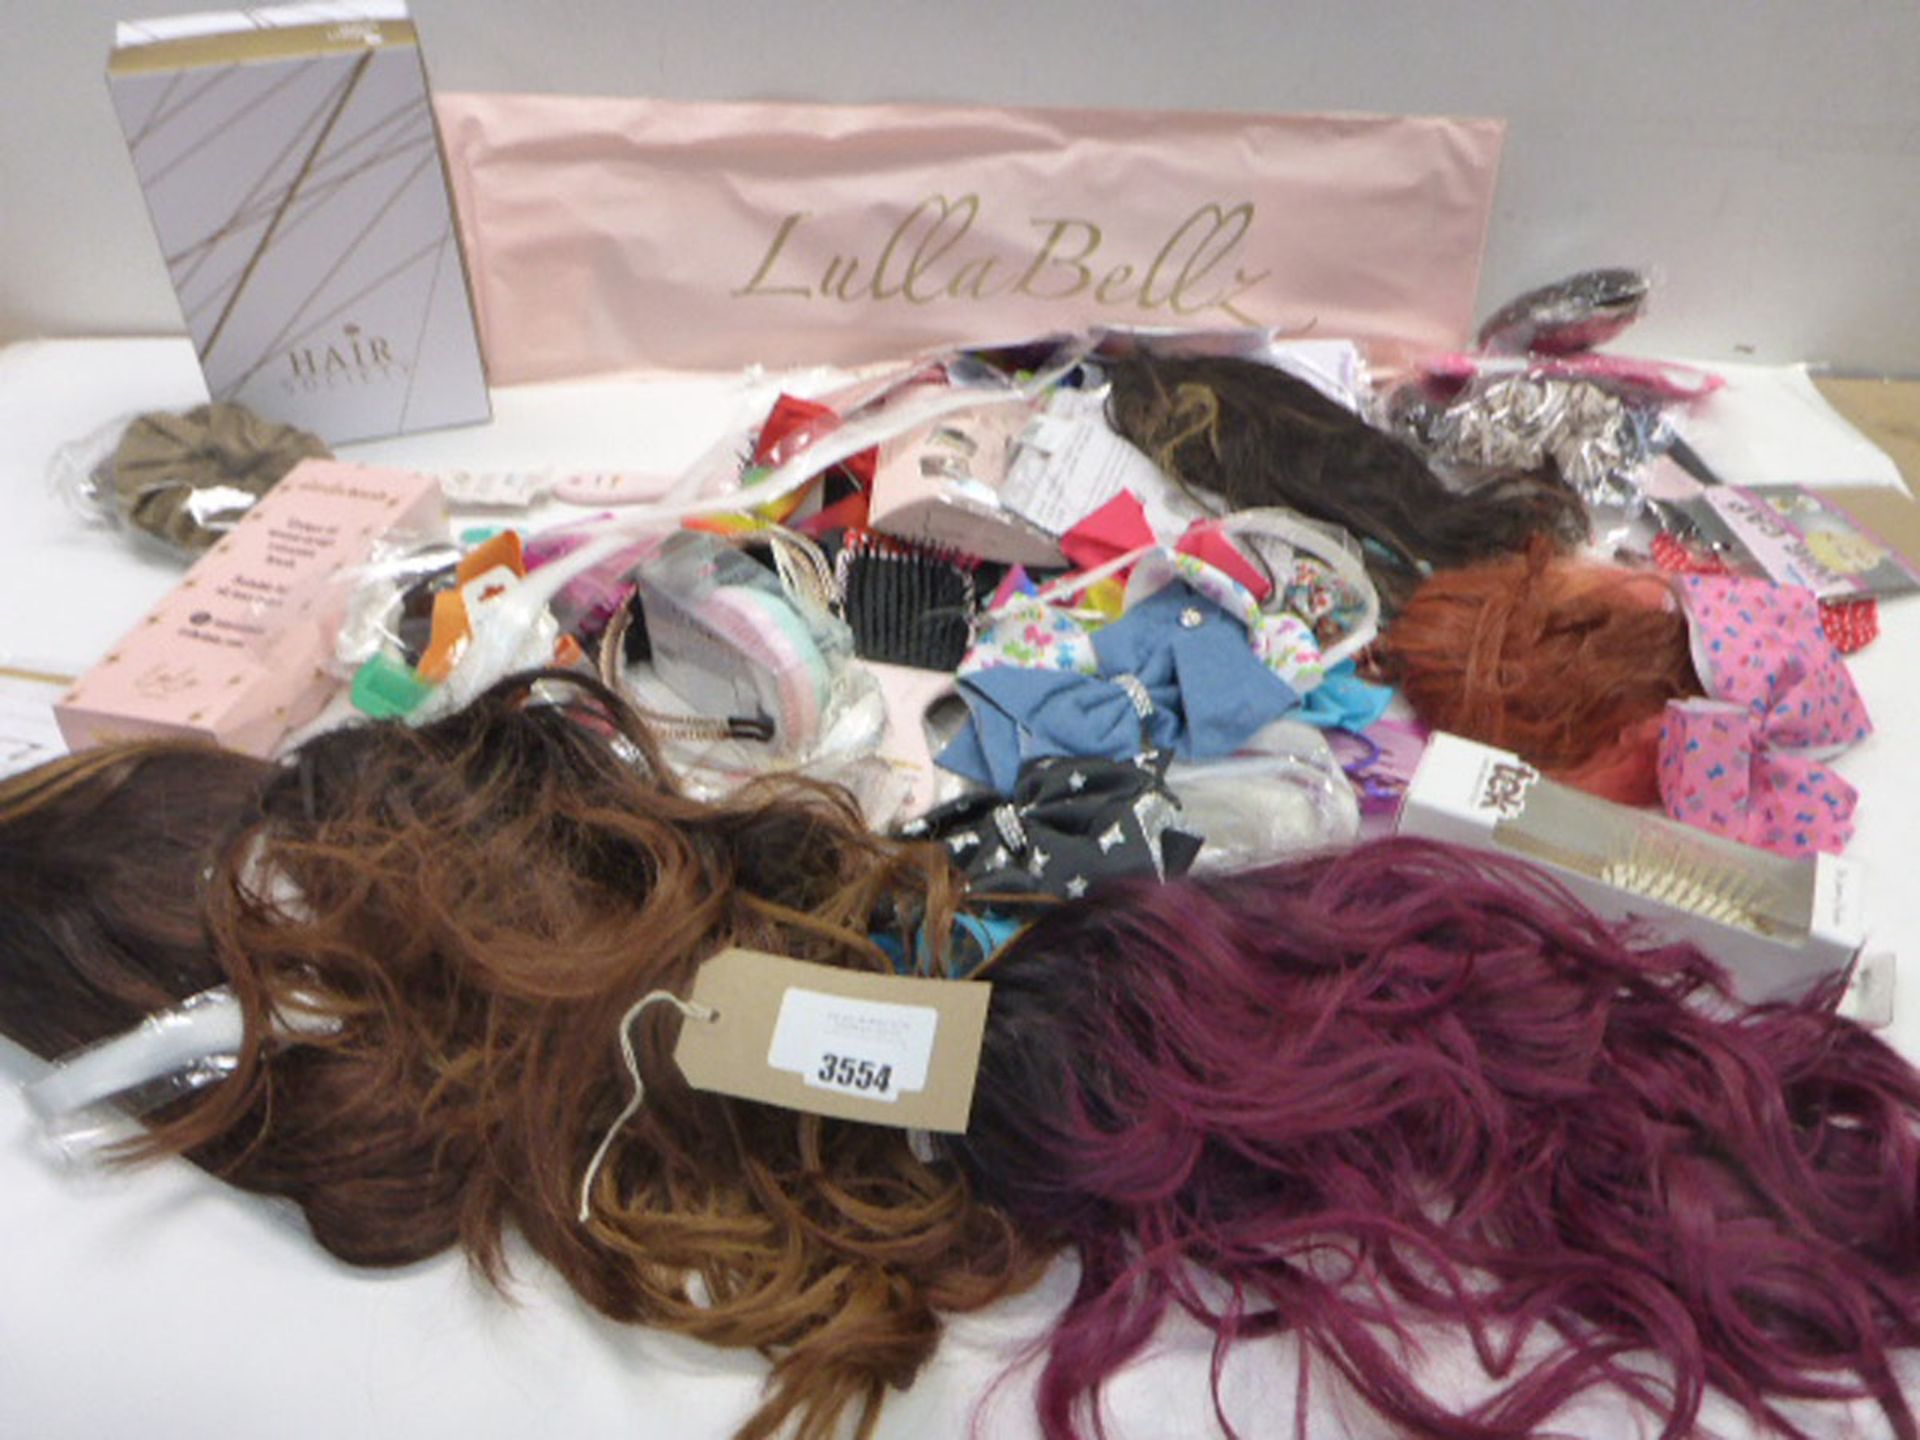 Selection of wigs, hair pieces, hair brushes and hair accessories